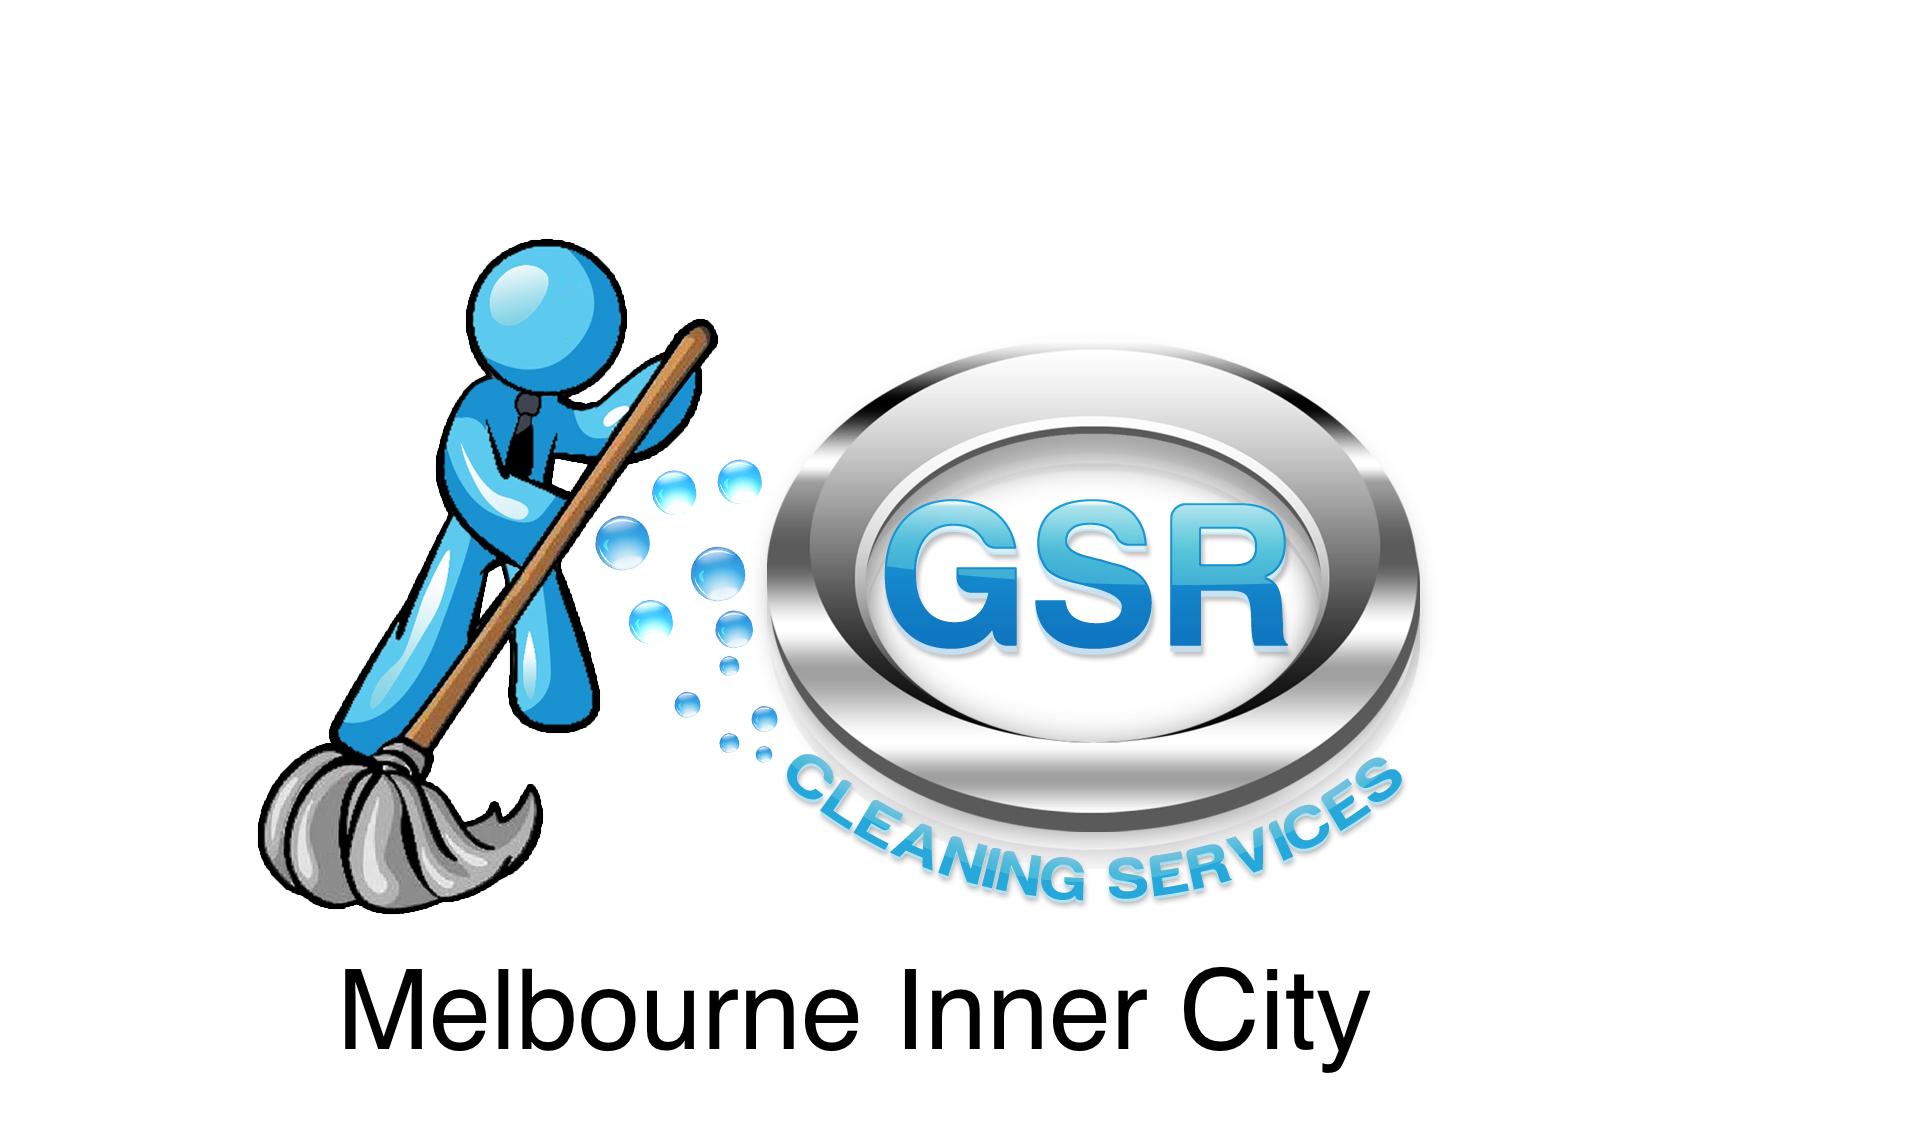 GSR CLEANING SERVICES Melbourne (03) 9547 7477